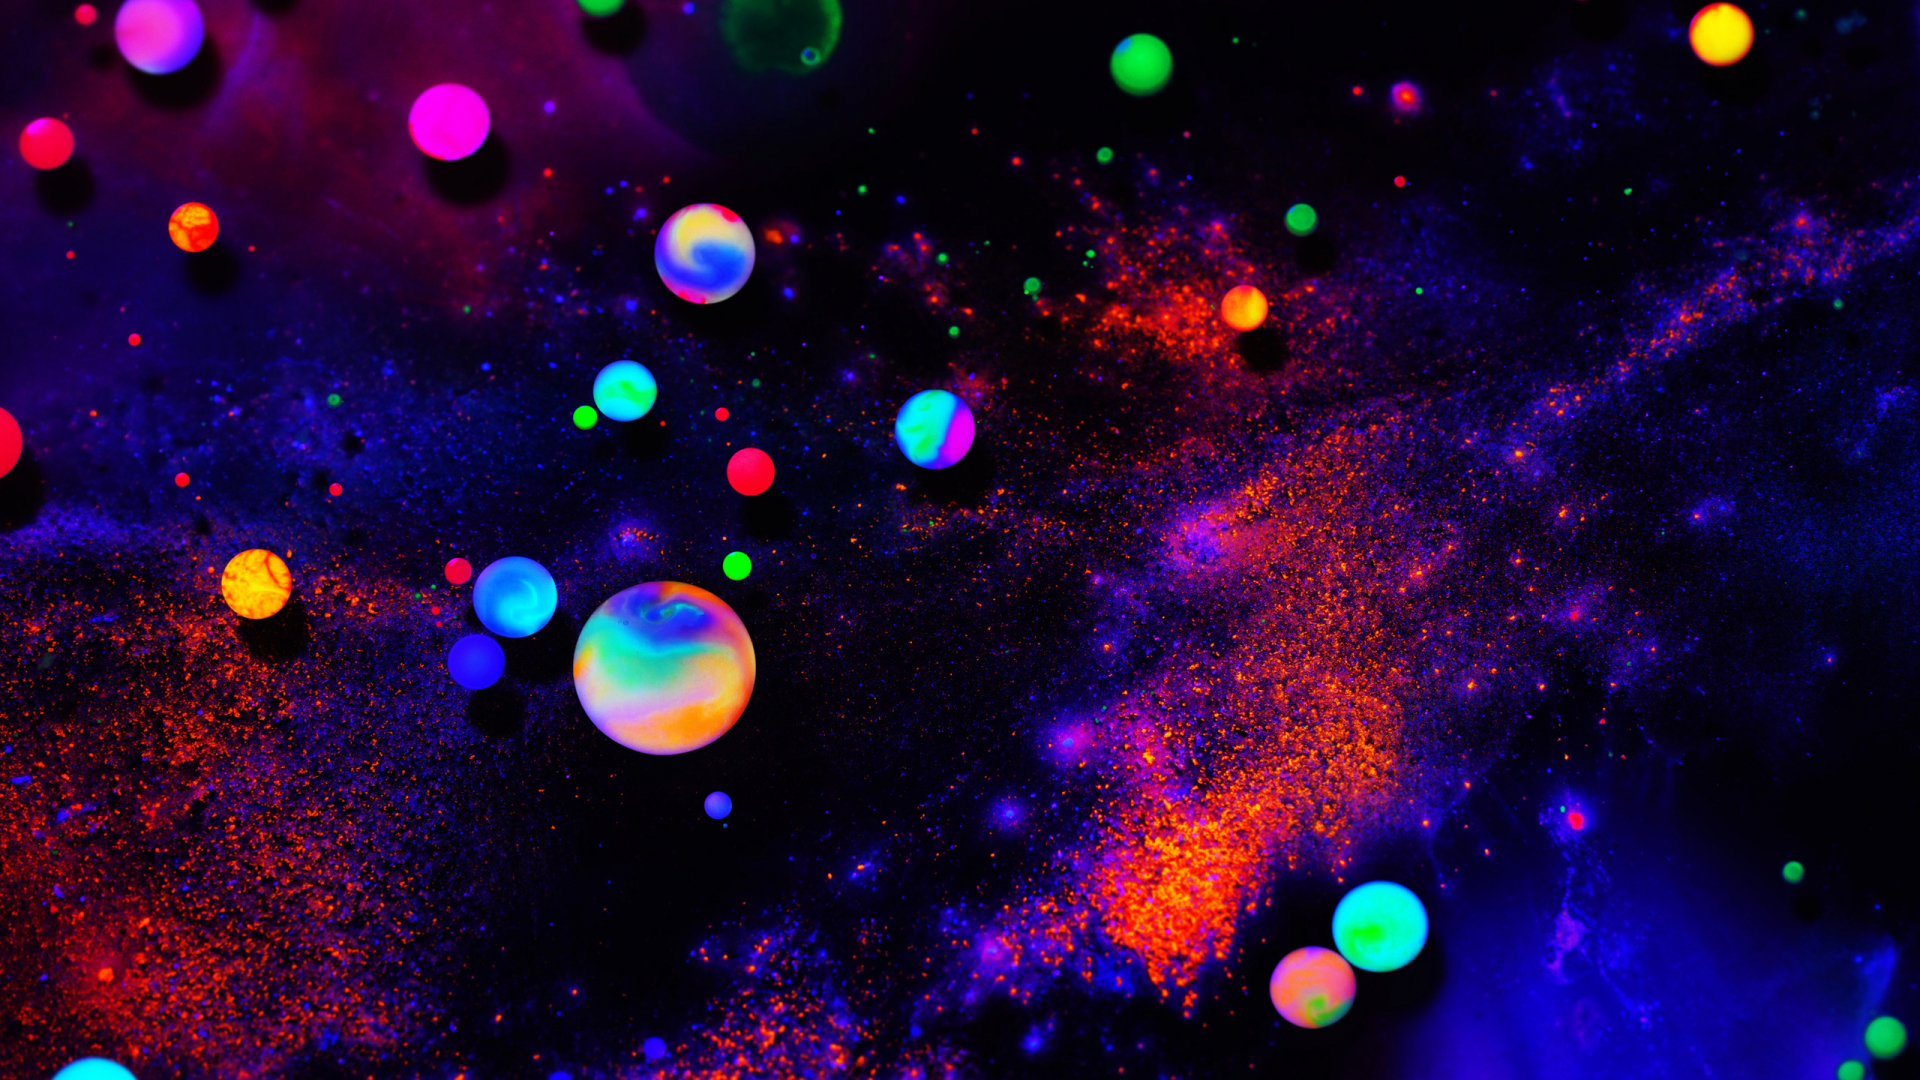 Download 1920x1080 wallpaper goodies, spheres, colorful, neon dark, abstract, full hd, hdtv, fhd, 1080p, 1920x1080 HD image, background, 1537